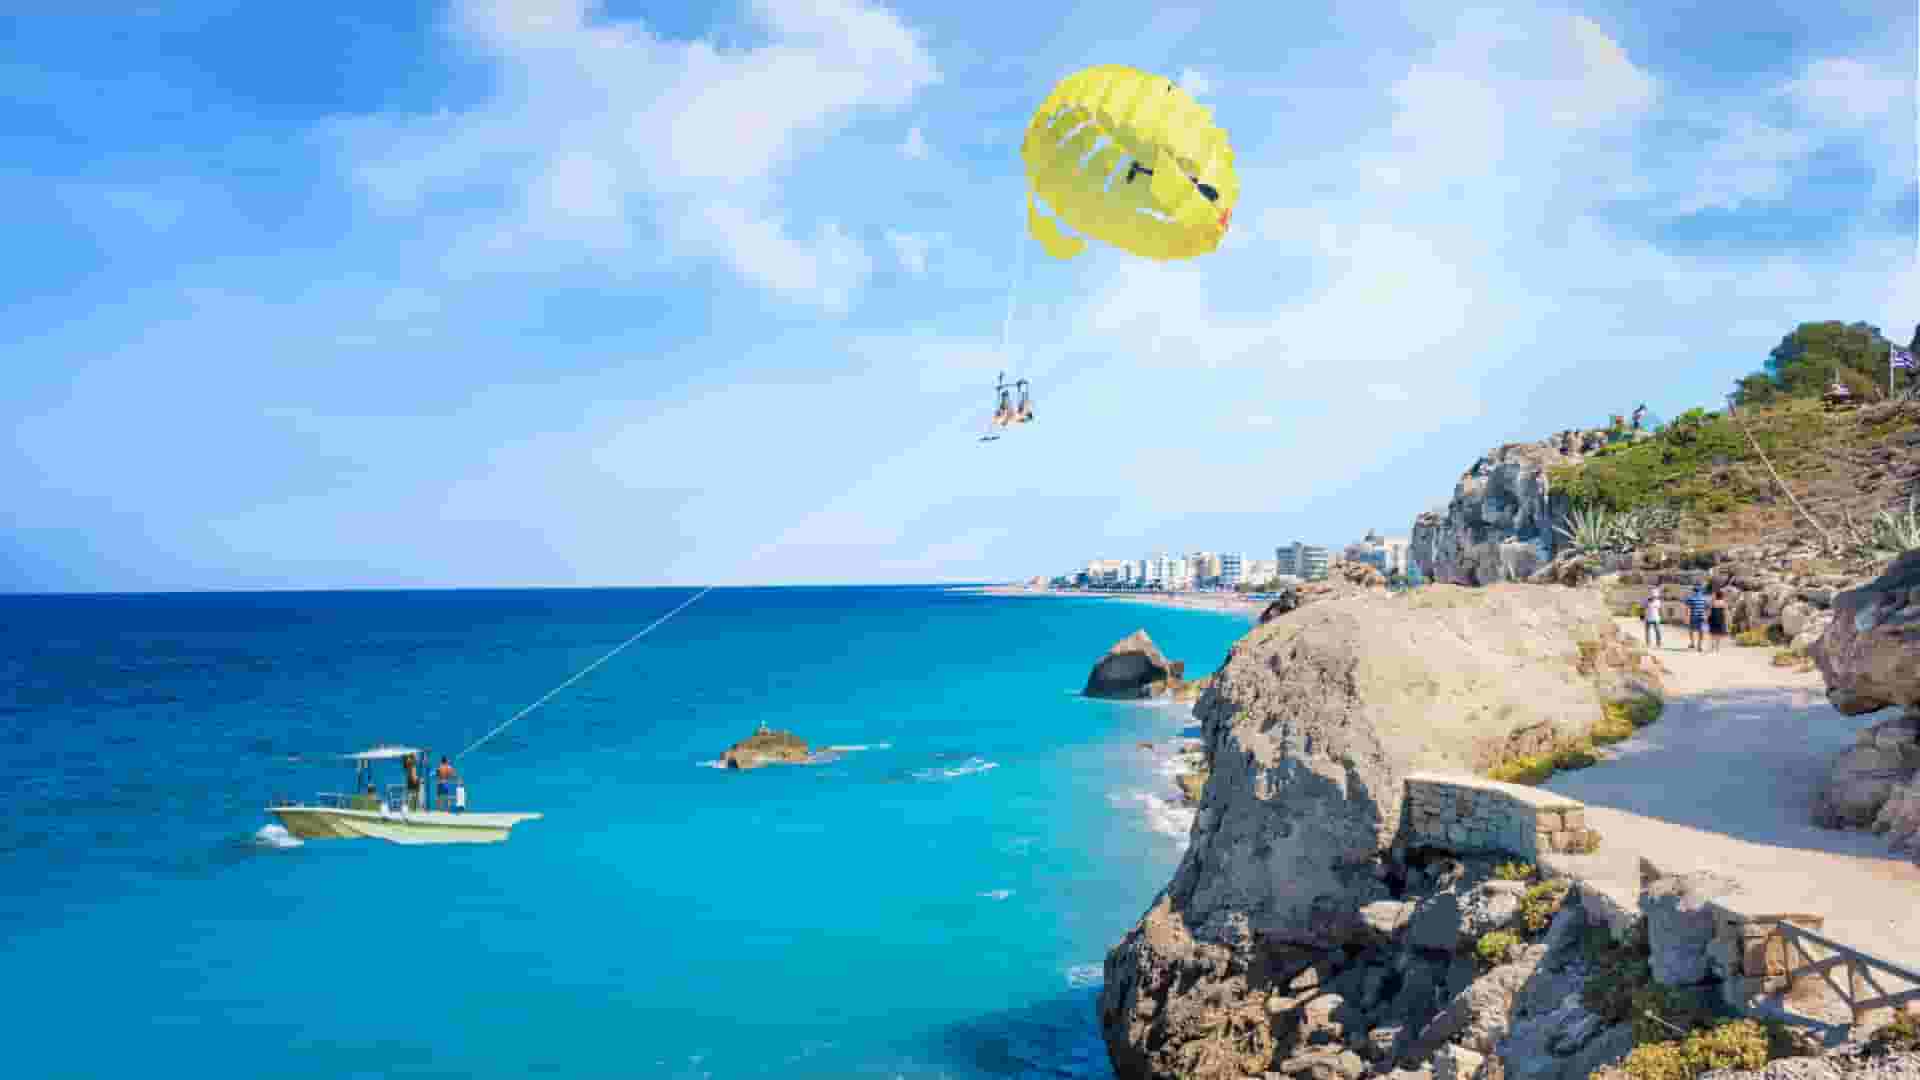 a beach with a boat and a parachute in the air